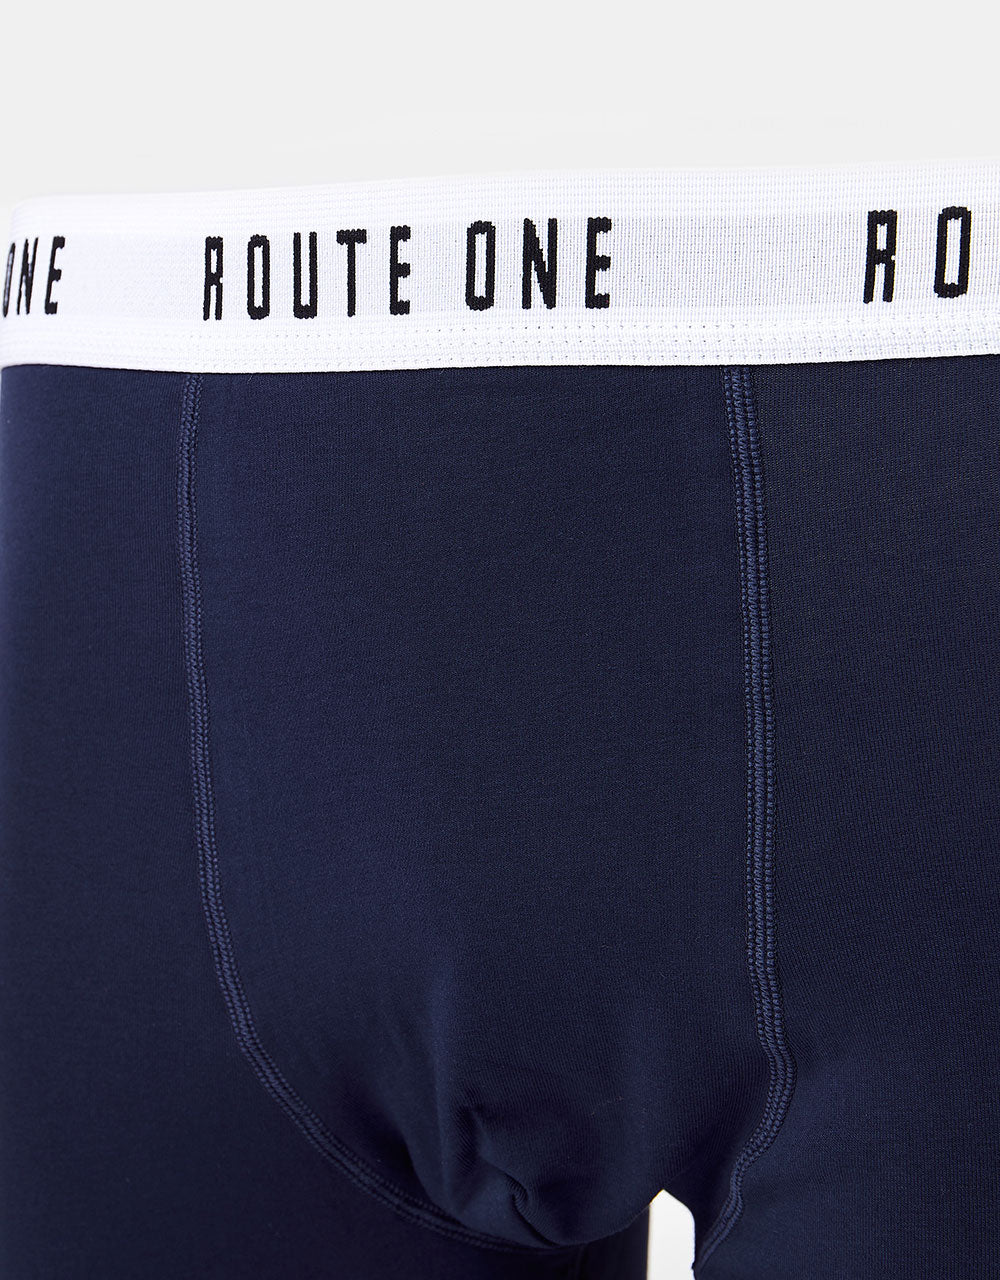 Route One Classic Boxer Shorts 2 Pack - Orange Zest/Classic Navy